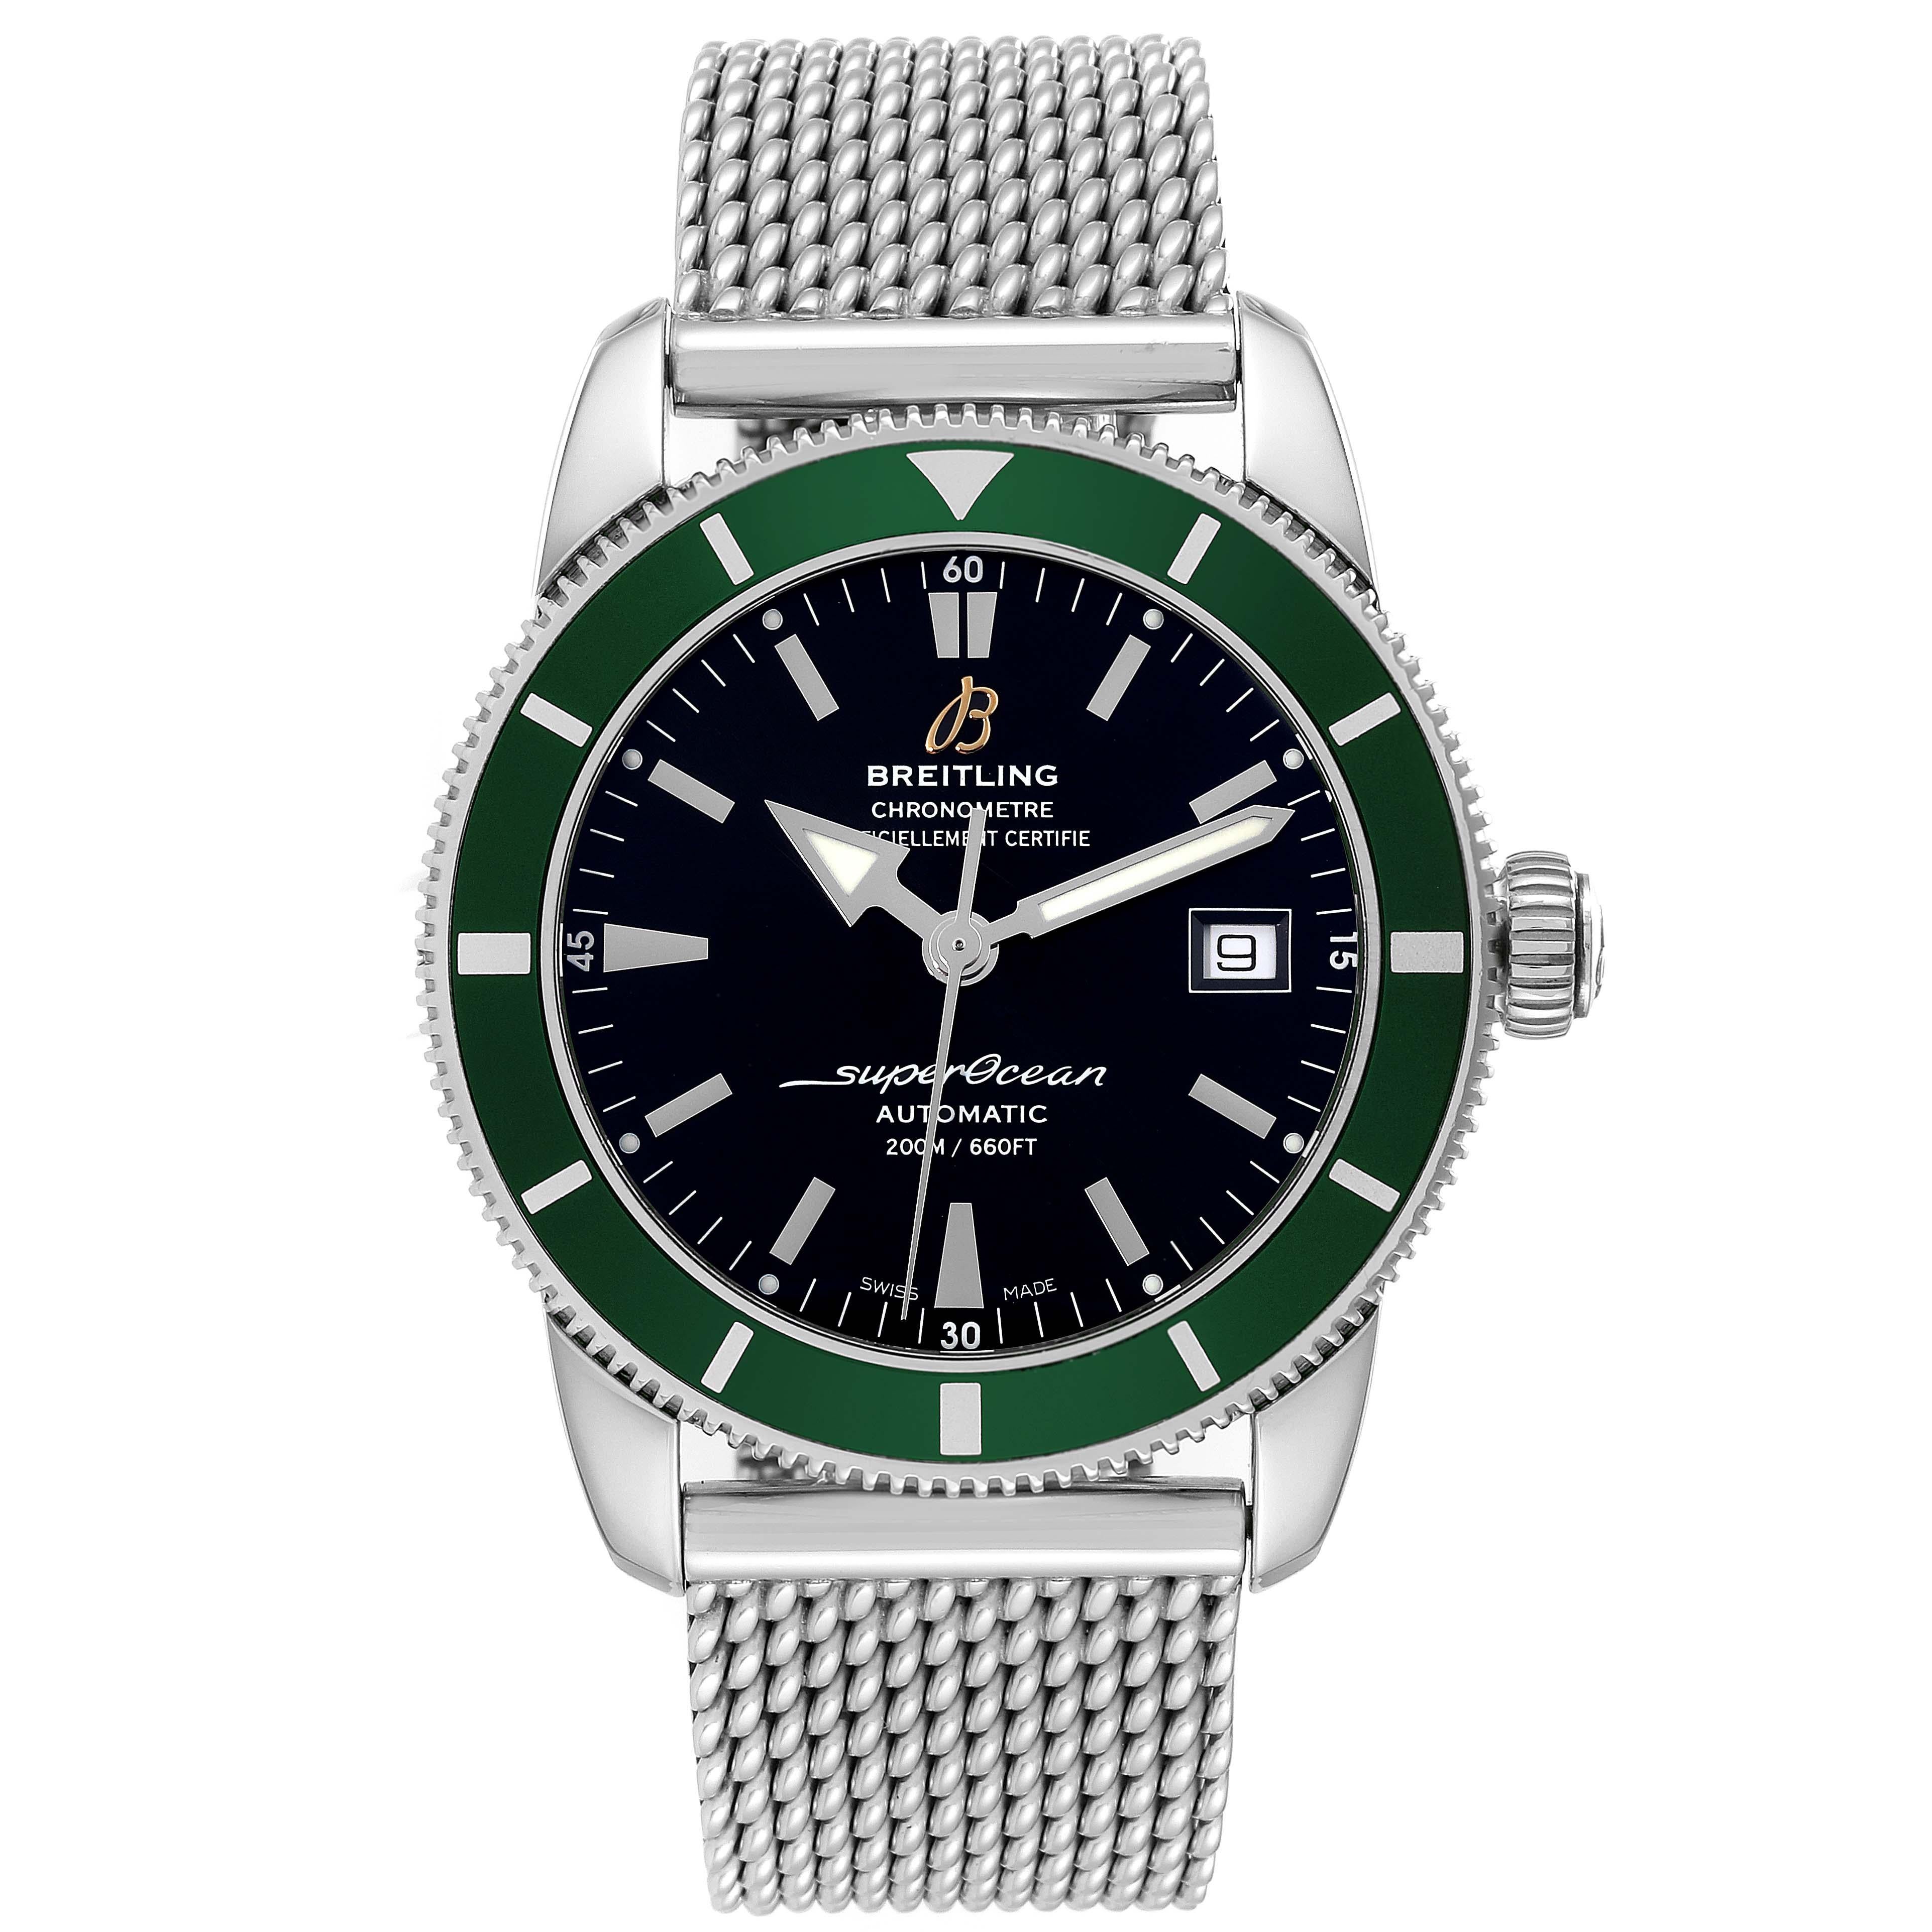 Breitling Superocean Heritage 42 Green Bezel Steel Mens Watch A17321 Box Papers. Automatic self-winding movement. Stainless steel case 42.0 mm in diameter. Stainless steel screwed-down crown. Green unidirectional rotating bezel. Scratch resistant